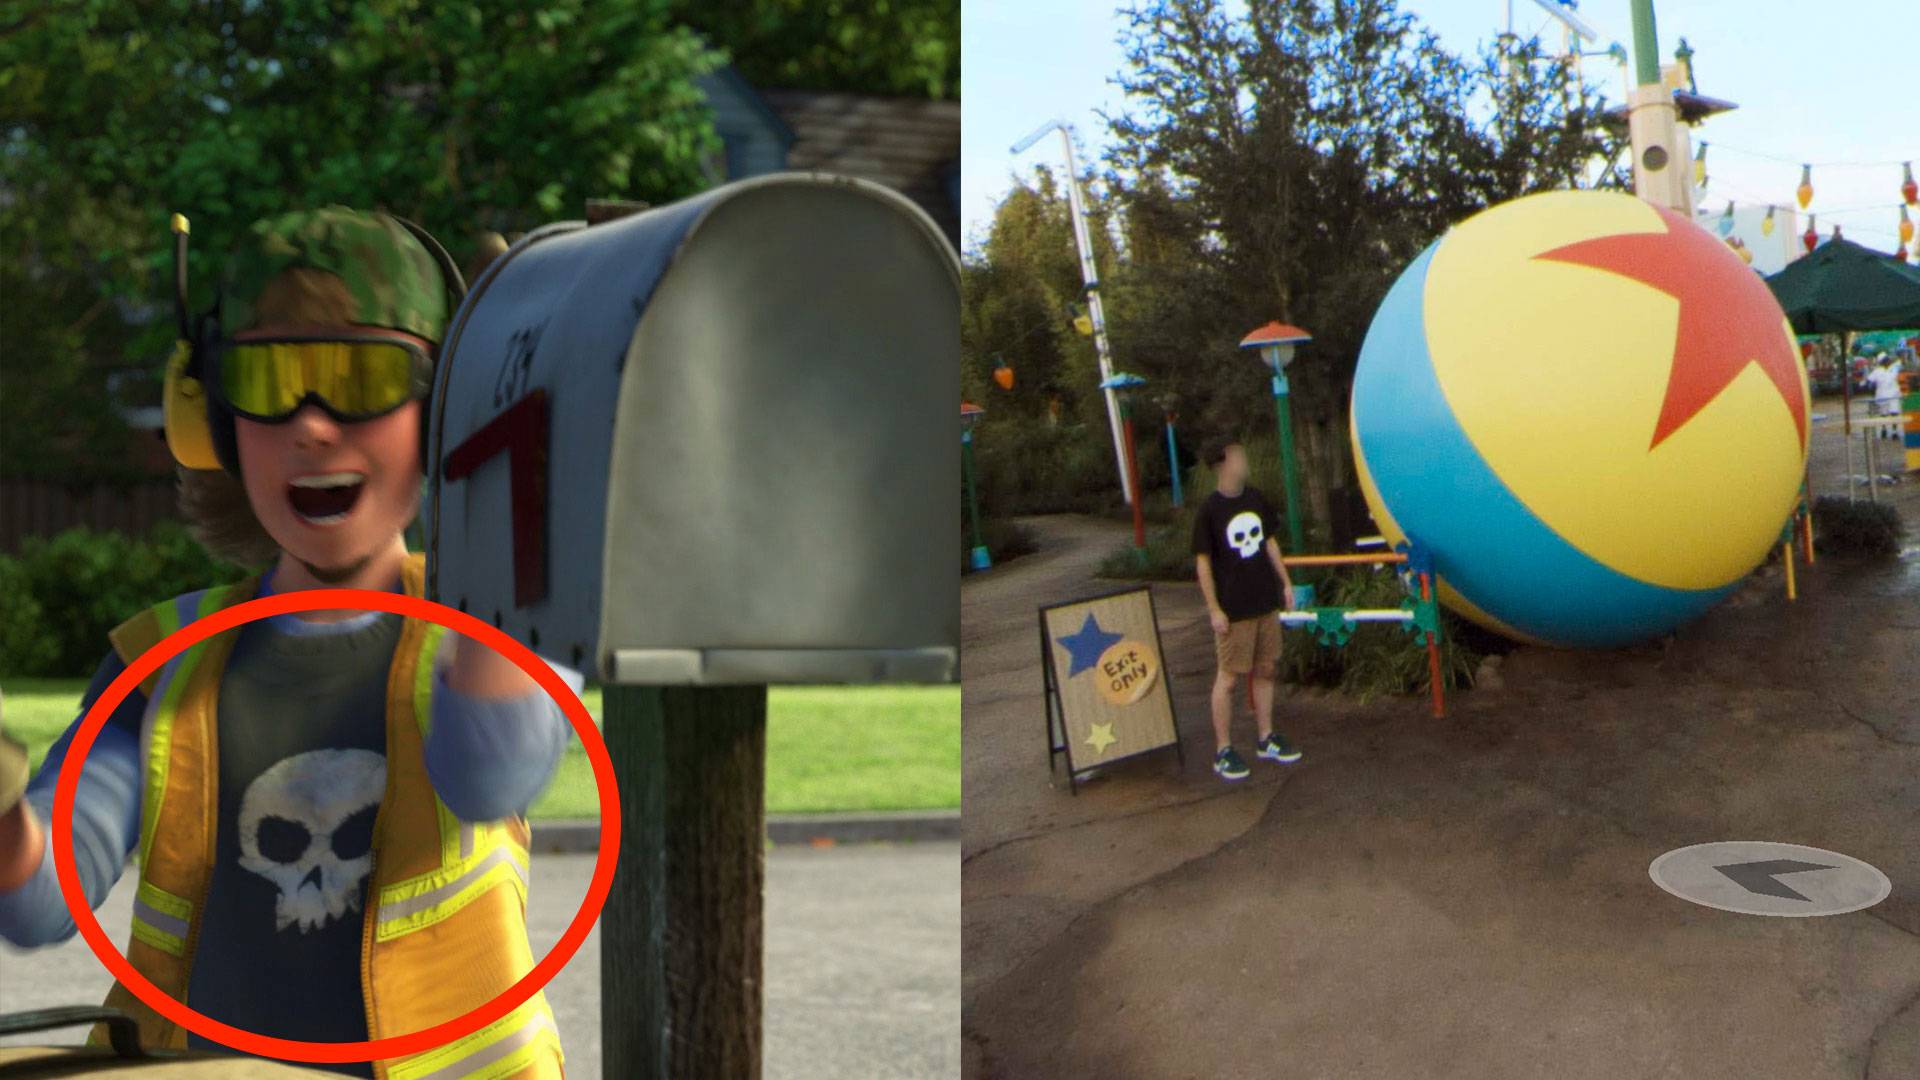 Easter Eggs in Google Street View of Toy Story Land